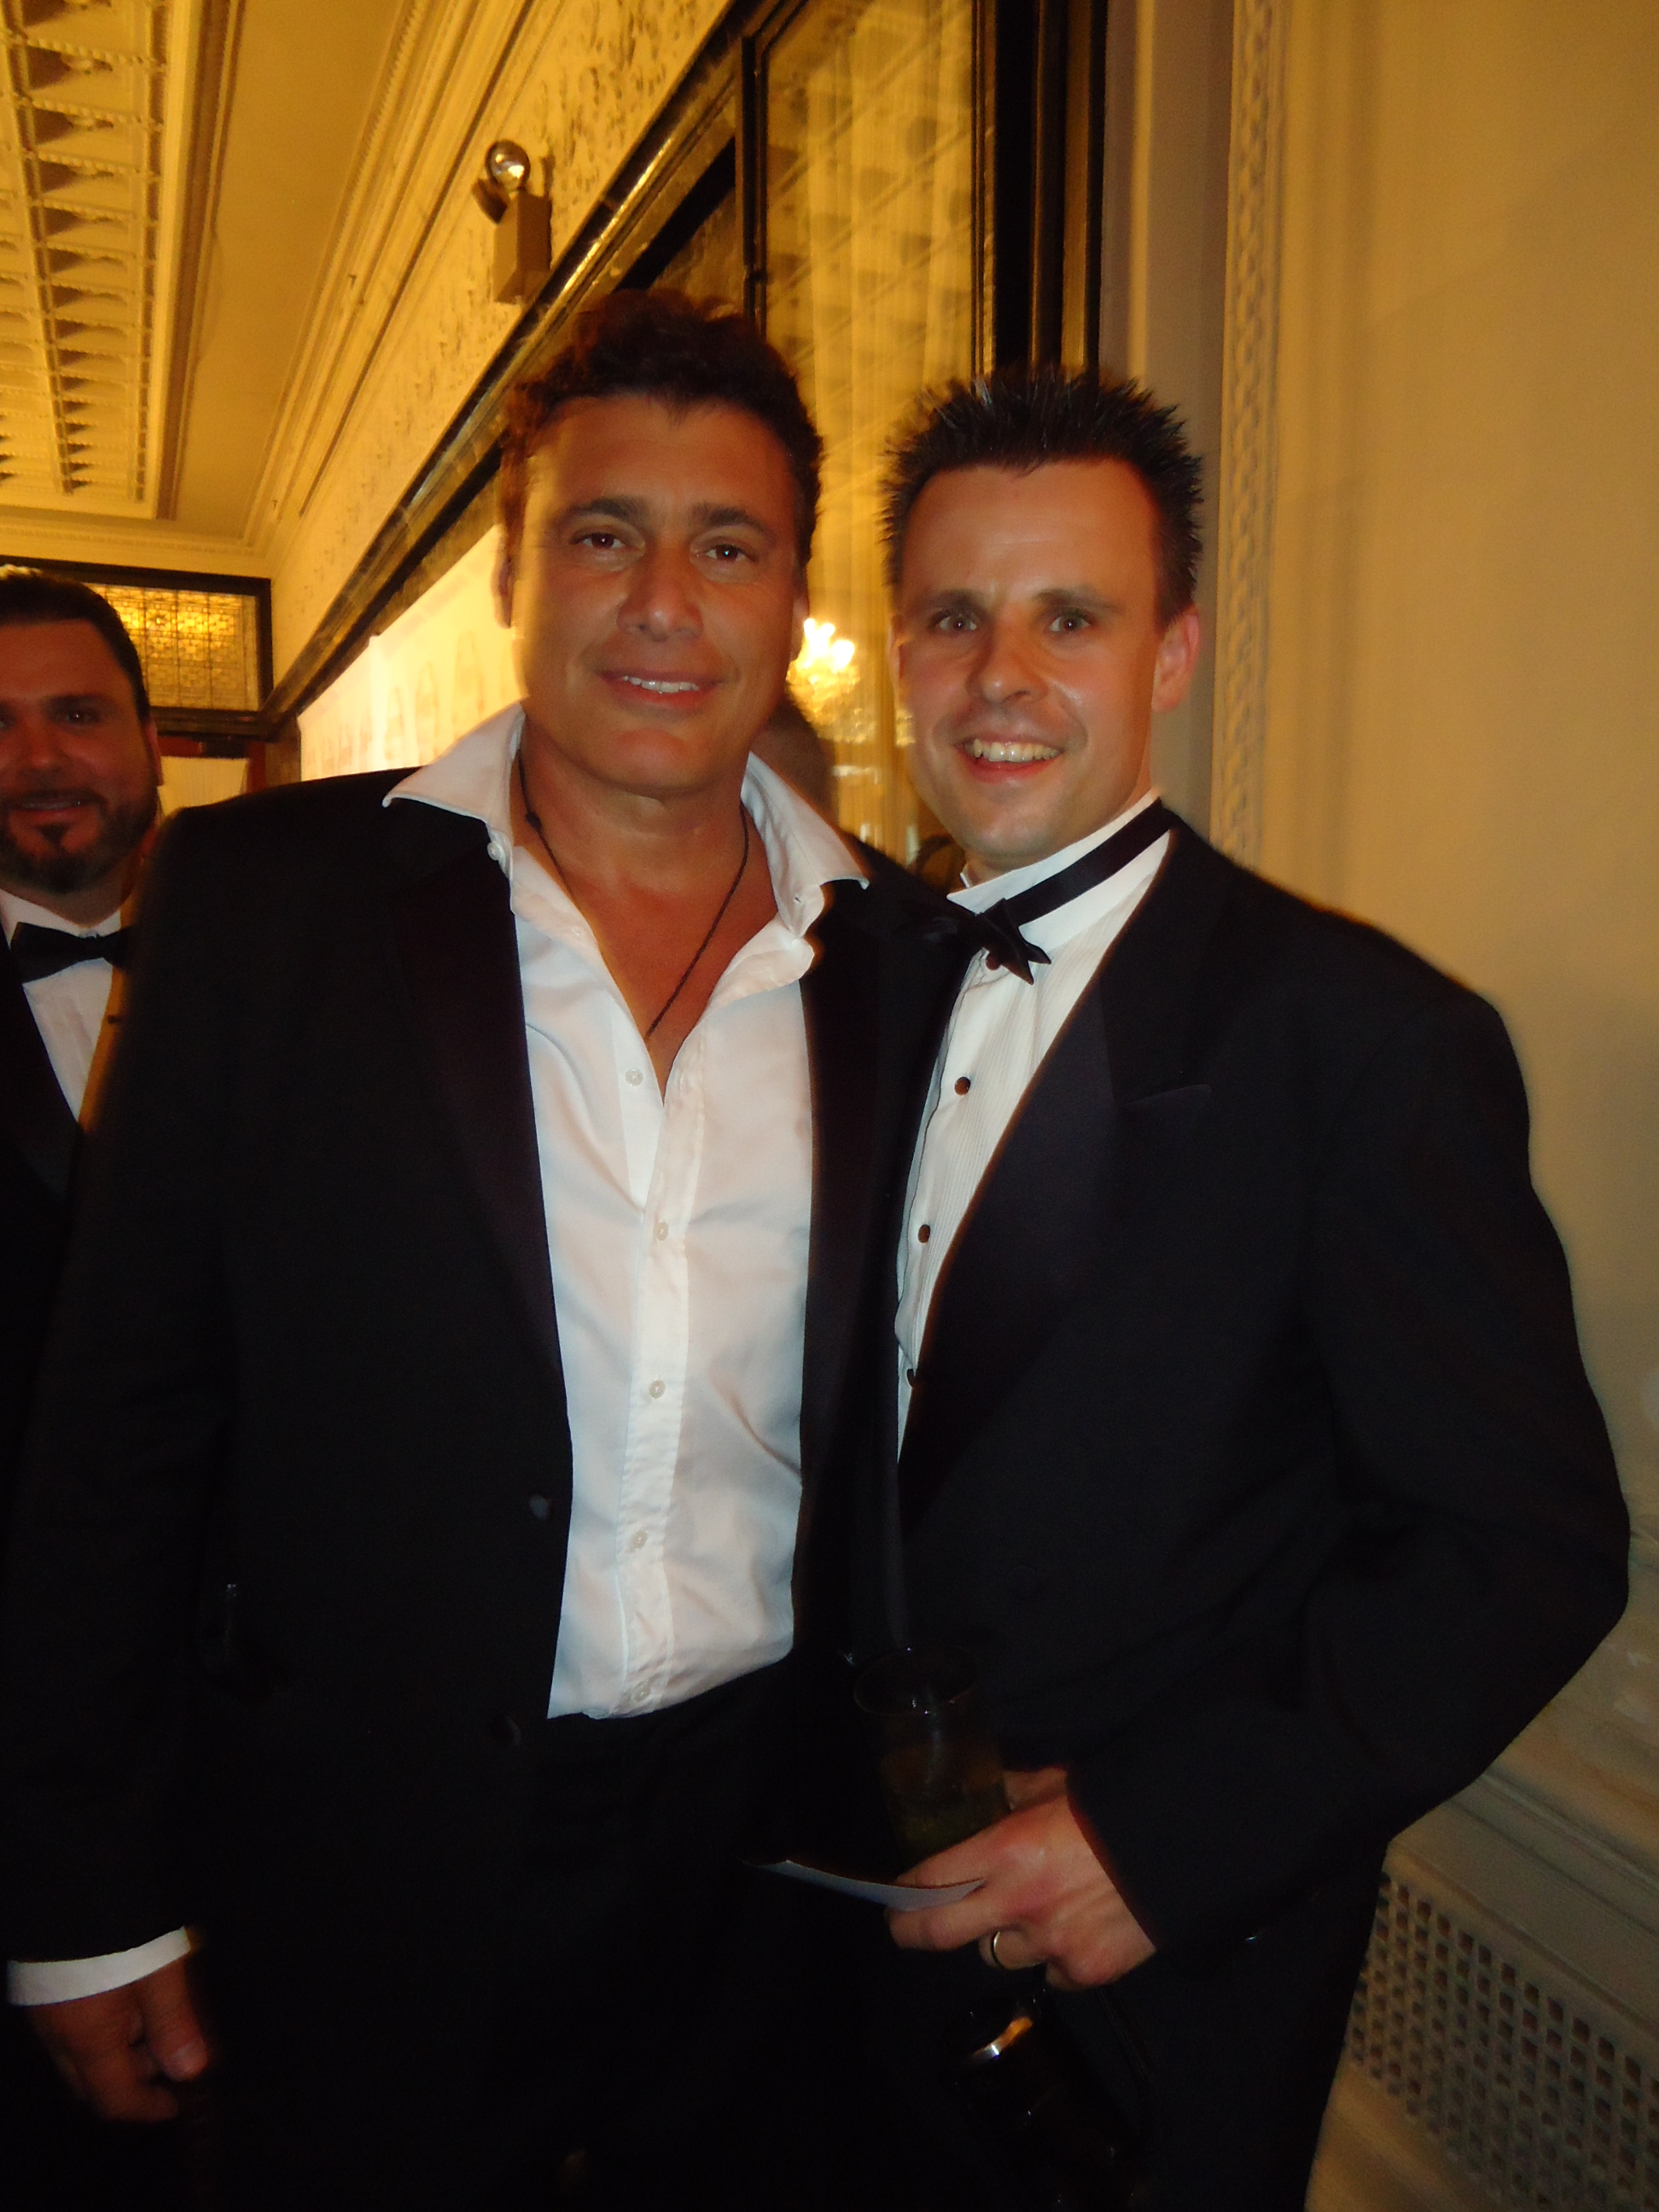 Lincoln Fenner with two time Golden Globe Nominee Steven Bauer (SCARFACE) at the New York City International Film Festival Red Carpet Opening Gala.